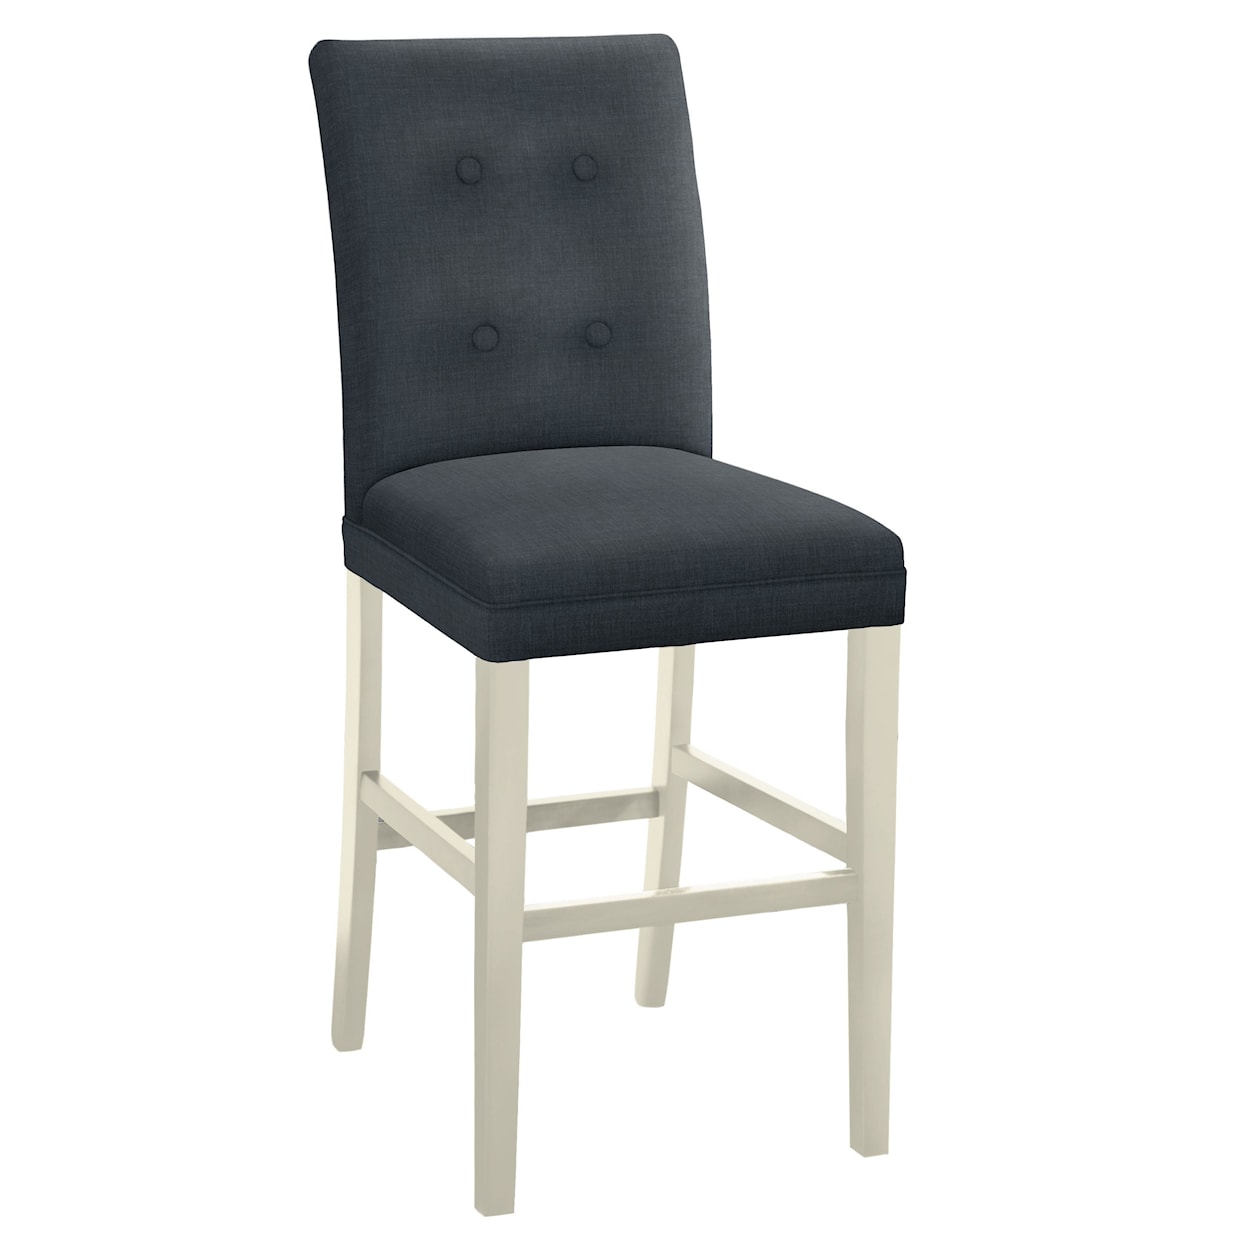 Hekman Upholstery Sharon Bar Stool with Buttons